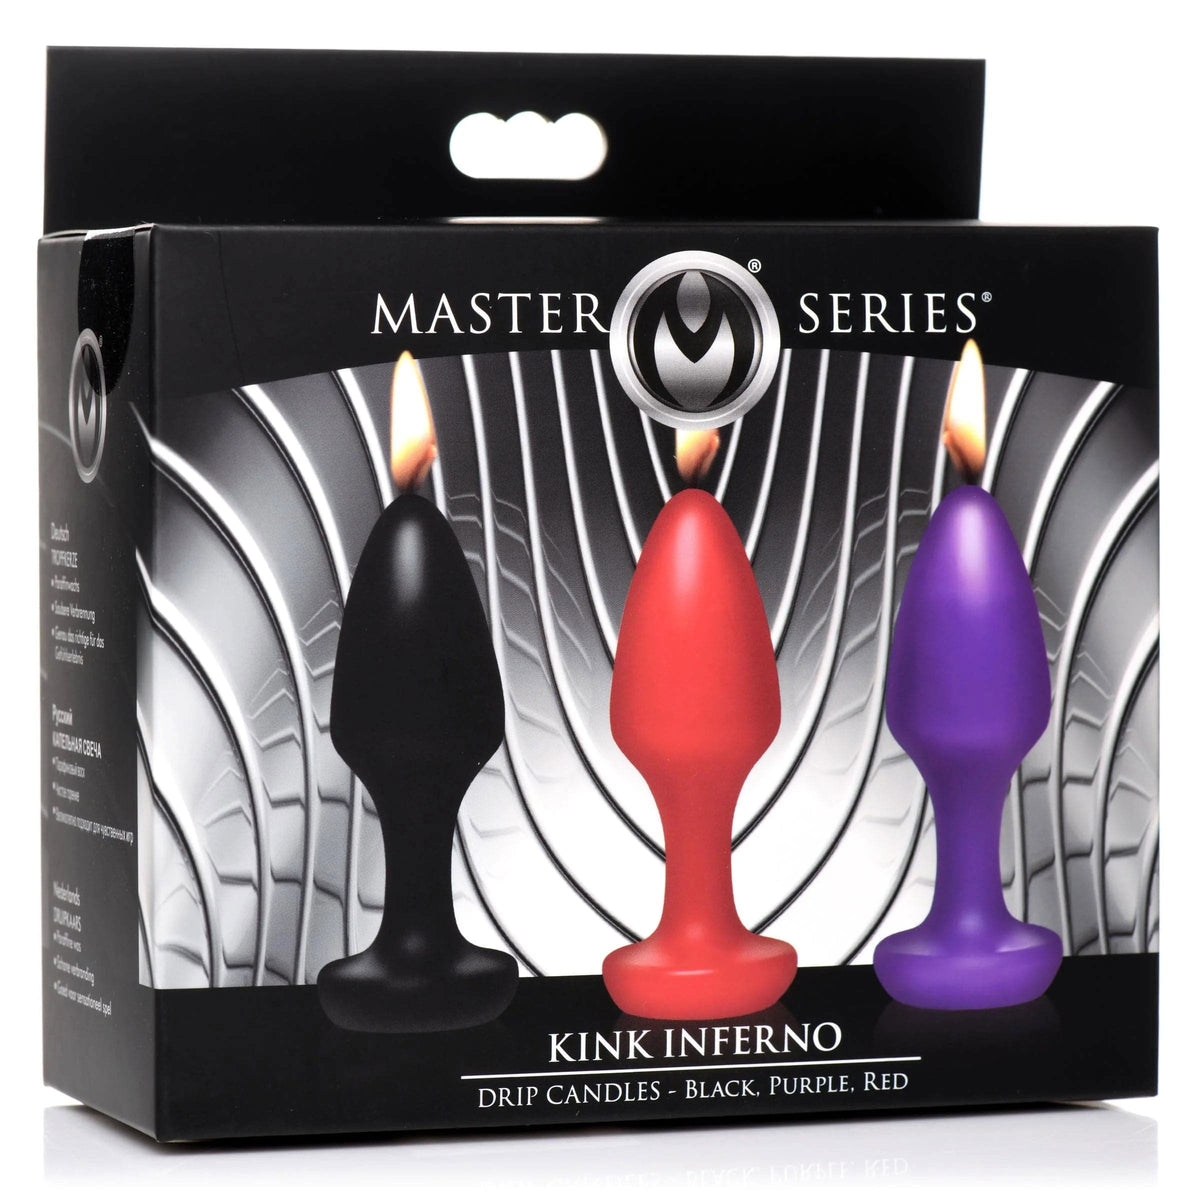 kink inferno drip candles black purple red